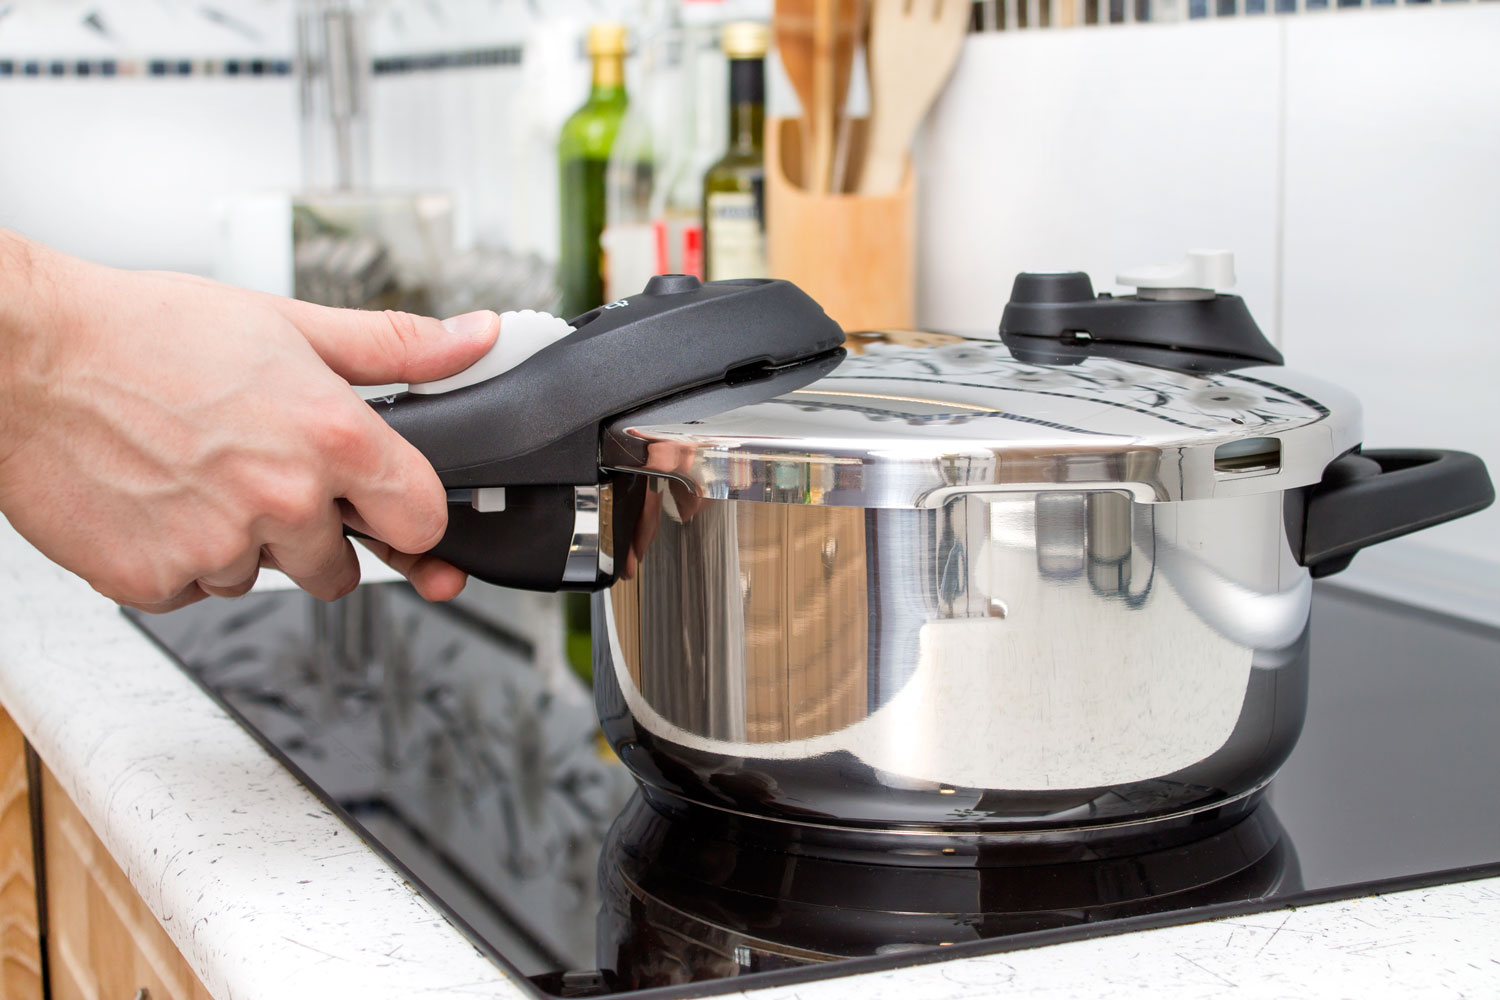 Does the Pressure Cooking Lid Automatically Seal When in Use?